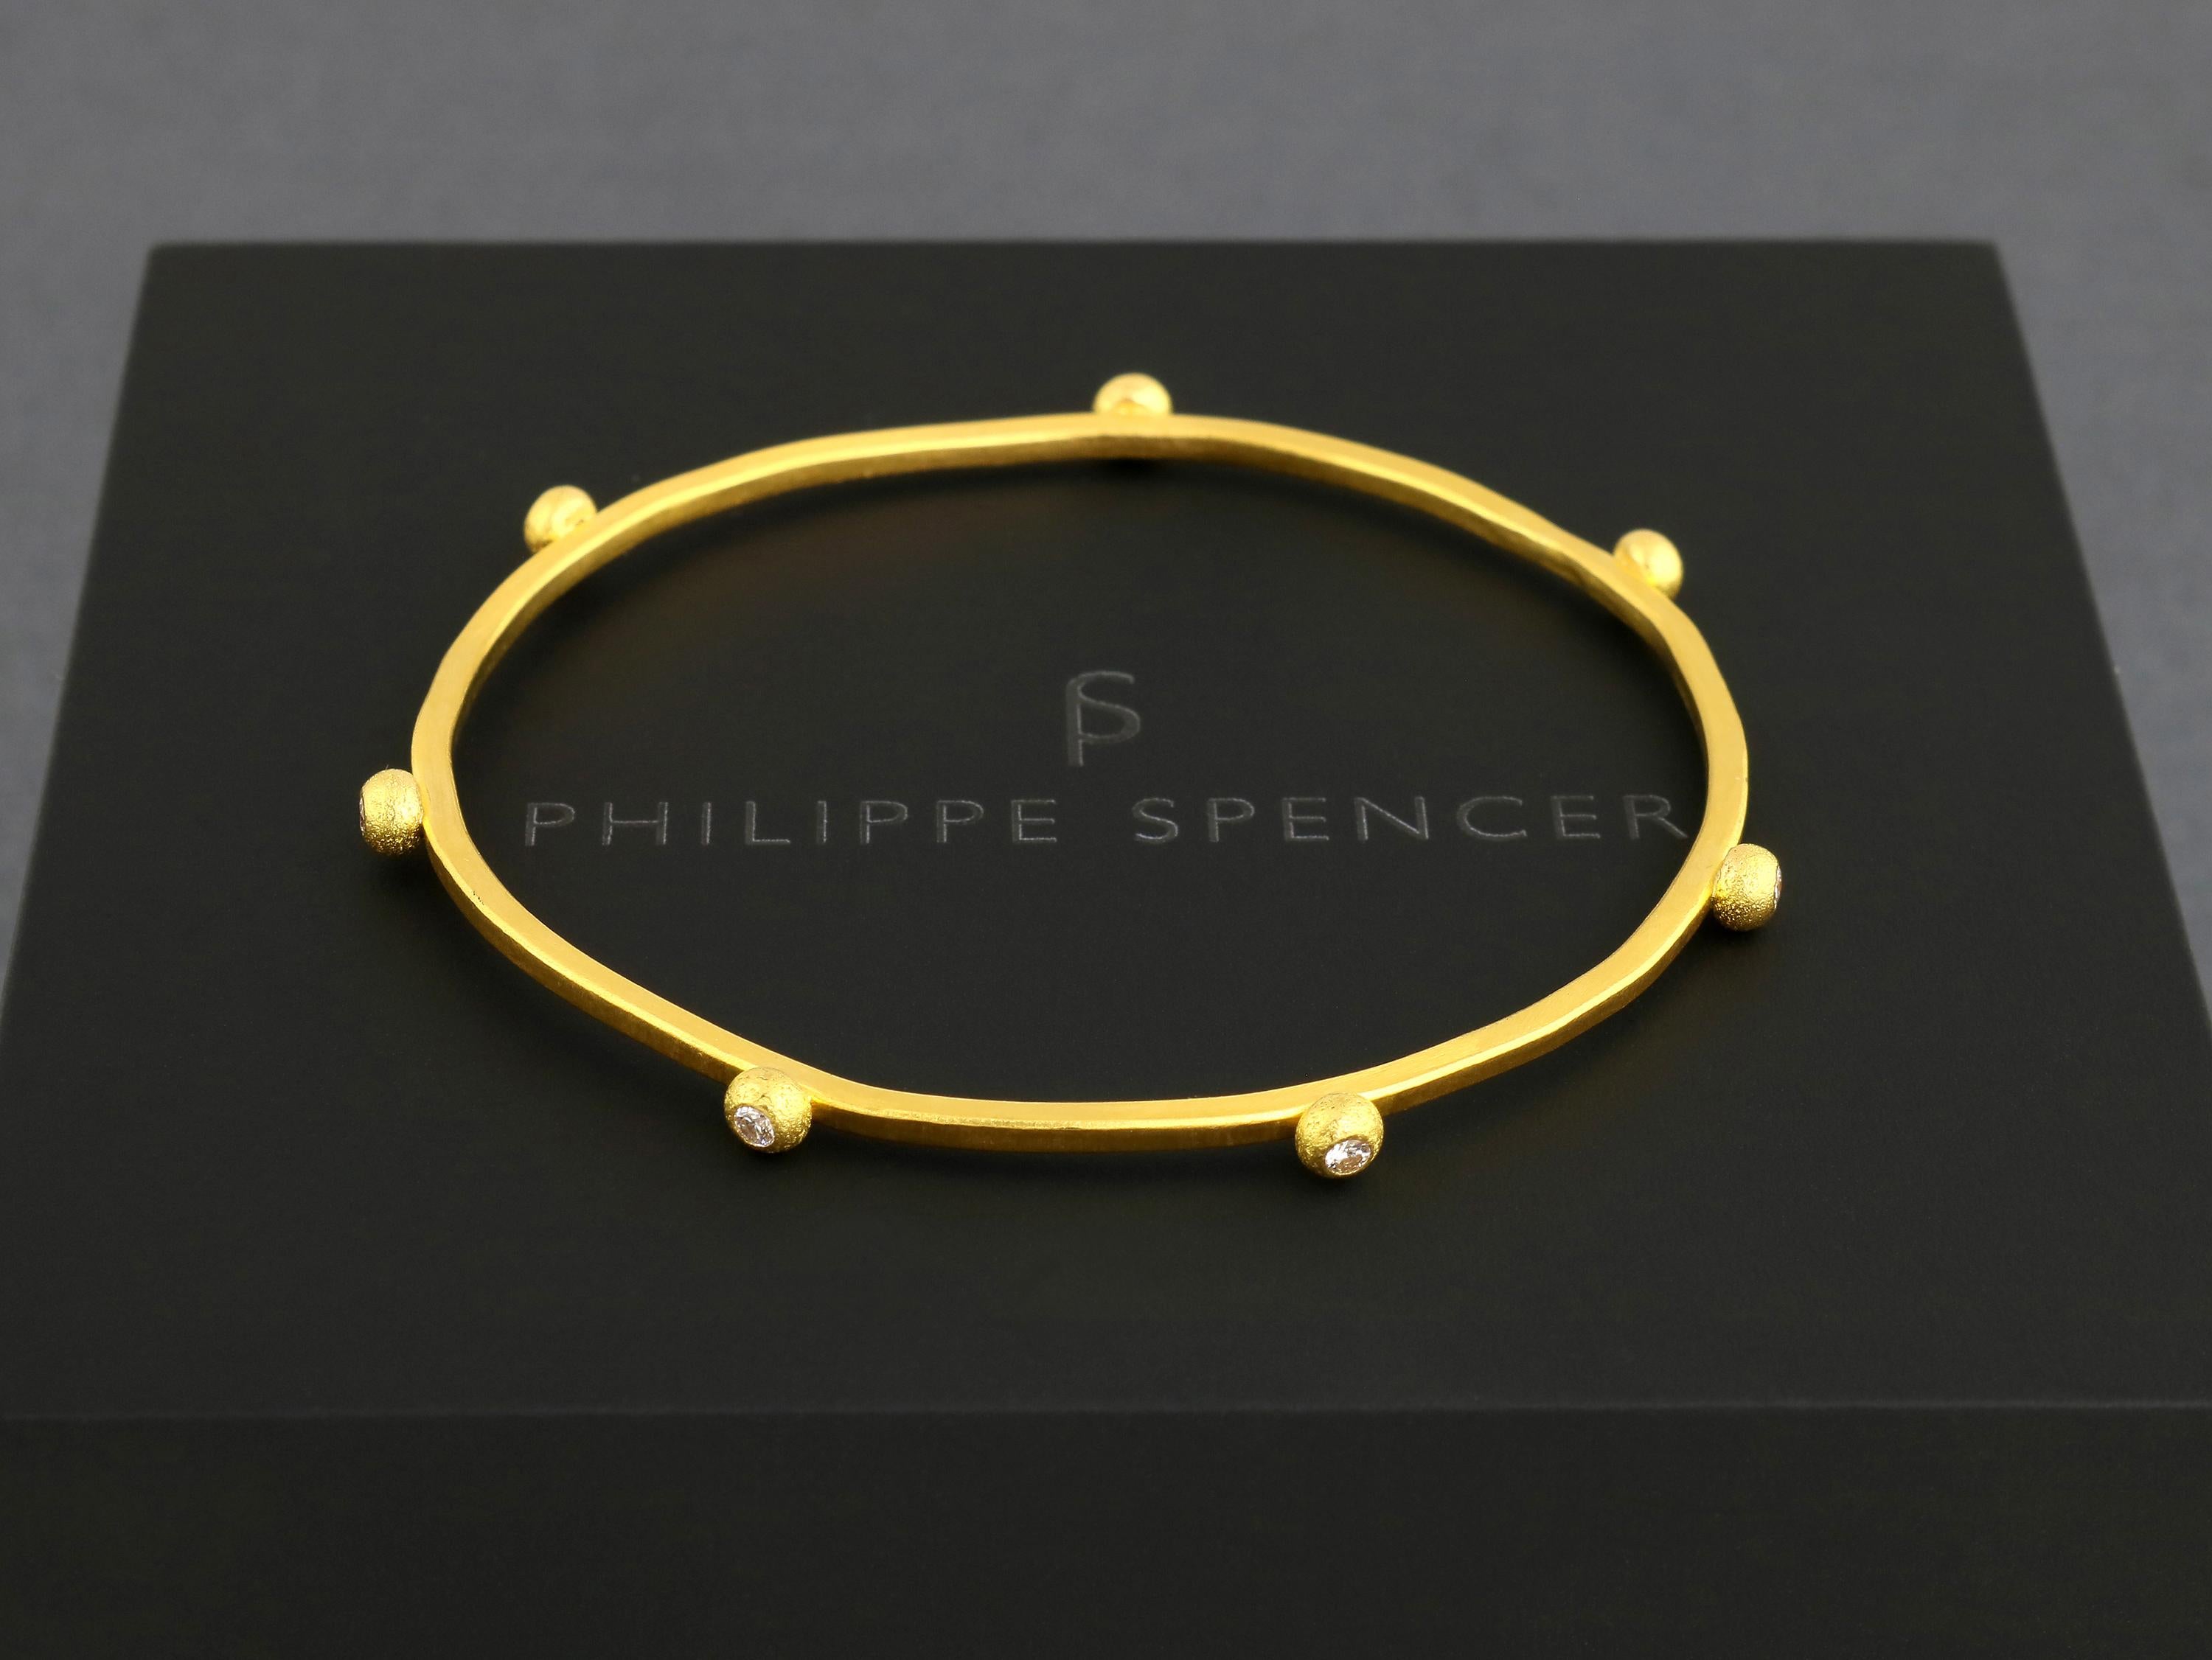 PHILIPPE SPENCER - Solid 24K Gold 2mm X 2mm Completely Hand & Anvil-Forged Bangle with 7-Quantity COLORLESS (D-F) Diamonds ( 1/3 Ct. Total) set in Pure 22K Gold Drops. A truly unique One-Of-A-Kind work of art.  

Being Pure 24 Karat Gold, it's